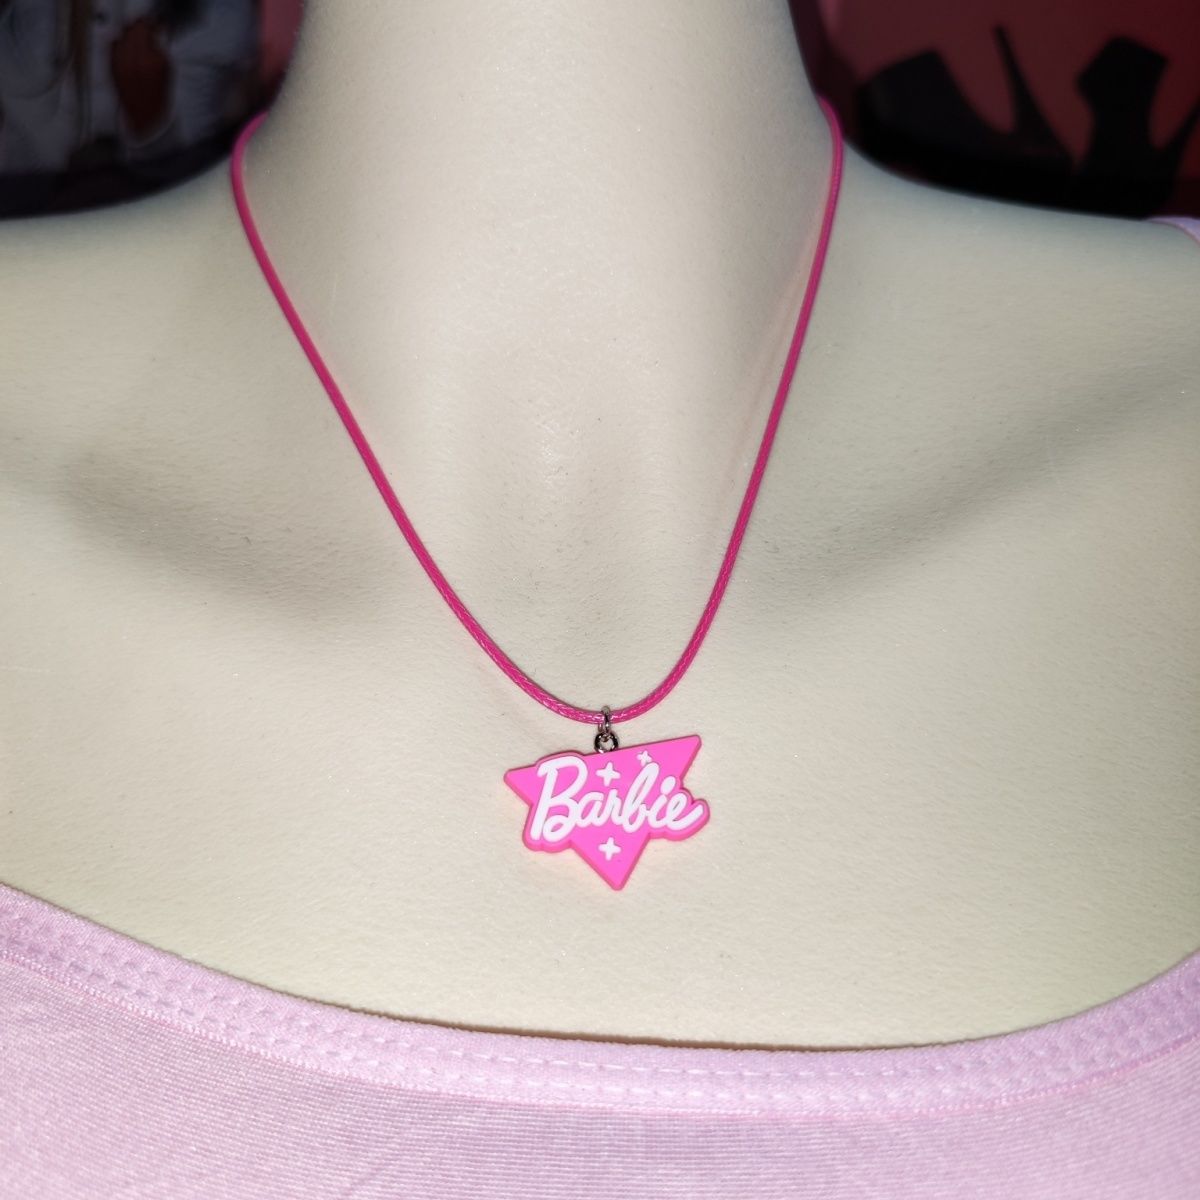 Anime Y2K Barbie Girls Necklace Kawaii Cartoon Doll Pendant Necklaces Fashion All-Match Women Girls Jewelry Accessories Gift Toy